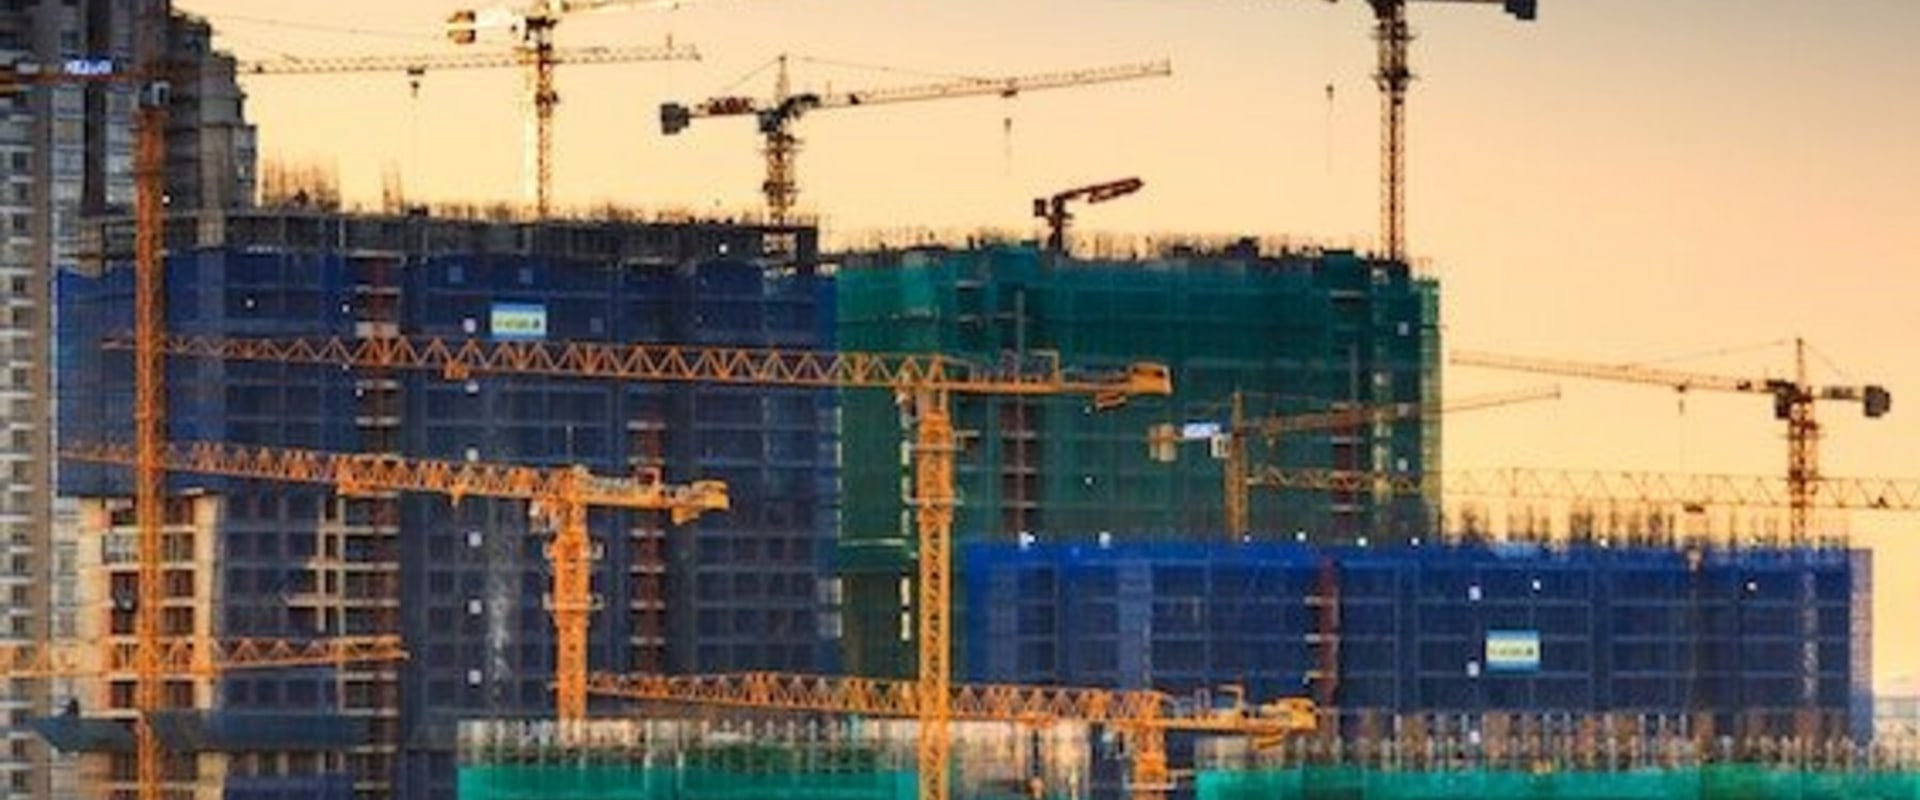 The Top 15 Construction Companies in the World: Who are the Giants Driving Economic Growth?